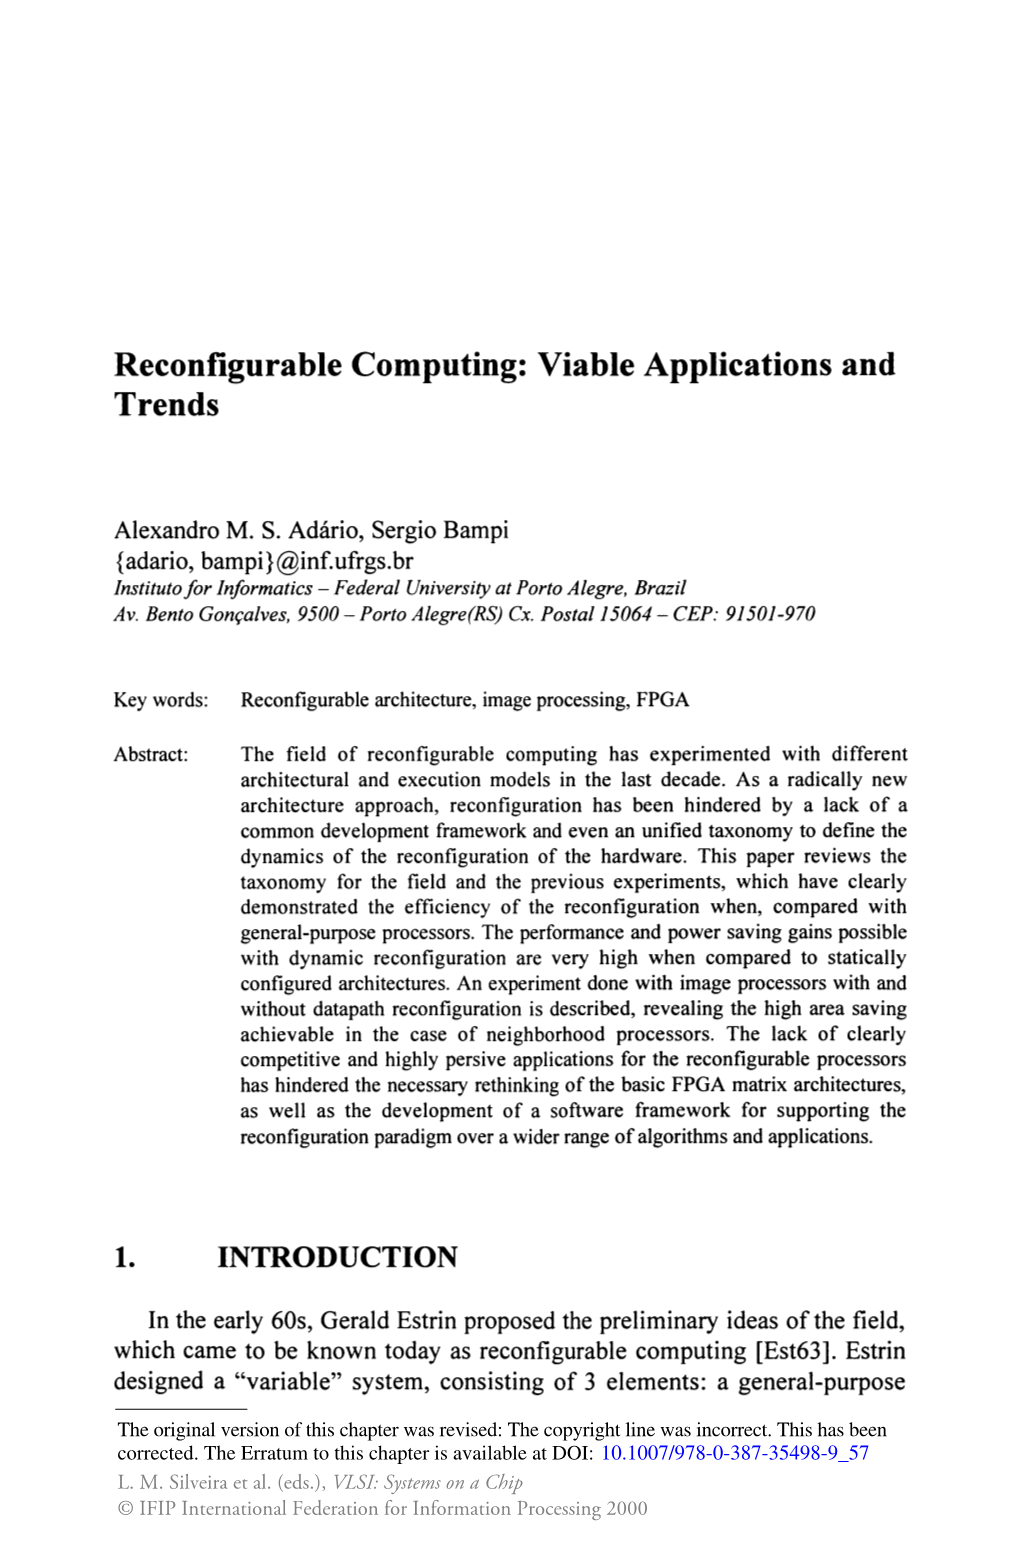 Reconfigurable Computing: Viable Applications and Trends